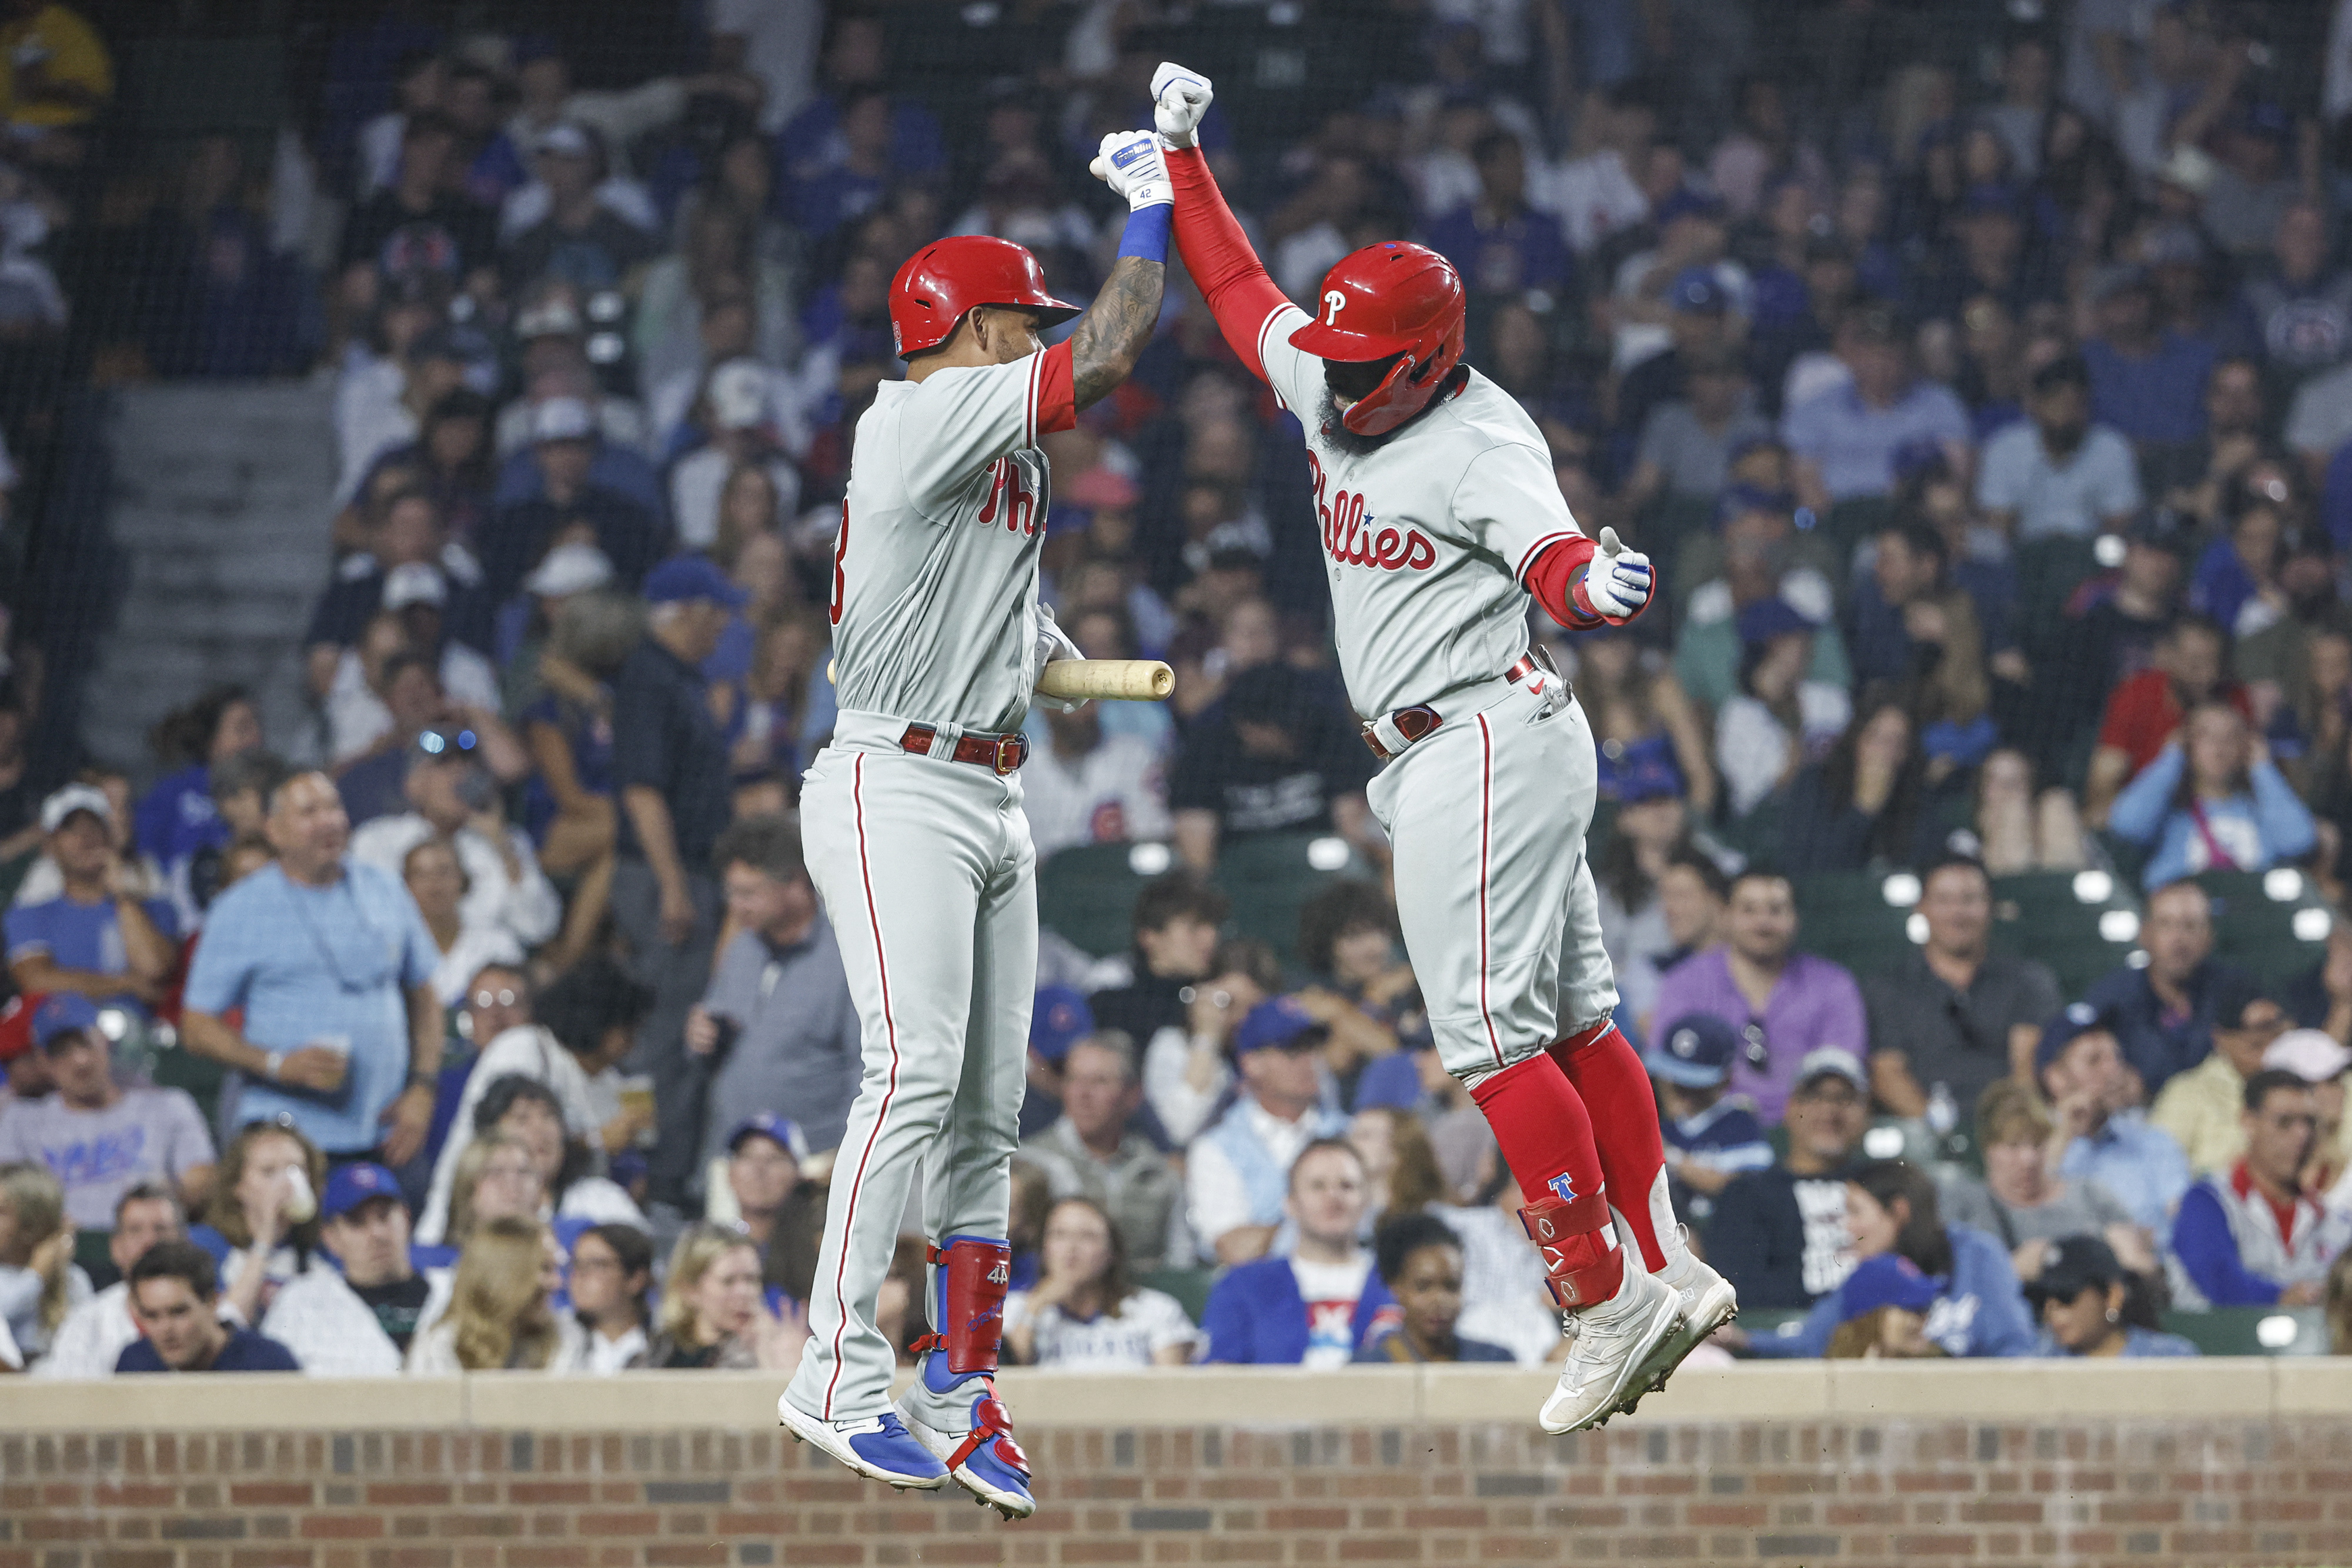 DOMINANCE: Phillies CRUSH Nationals 13-1 to complete another four